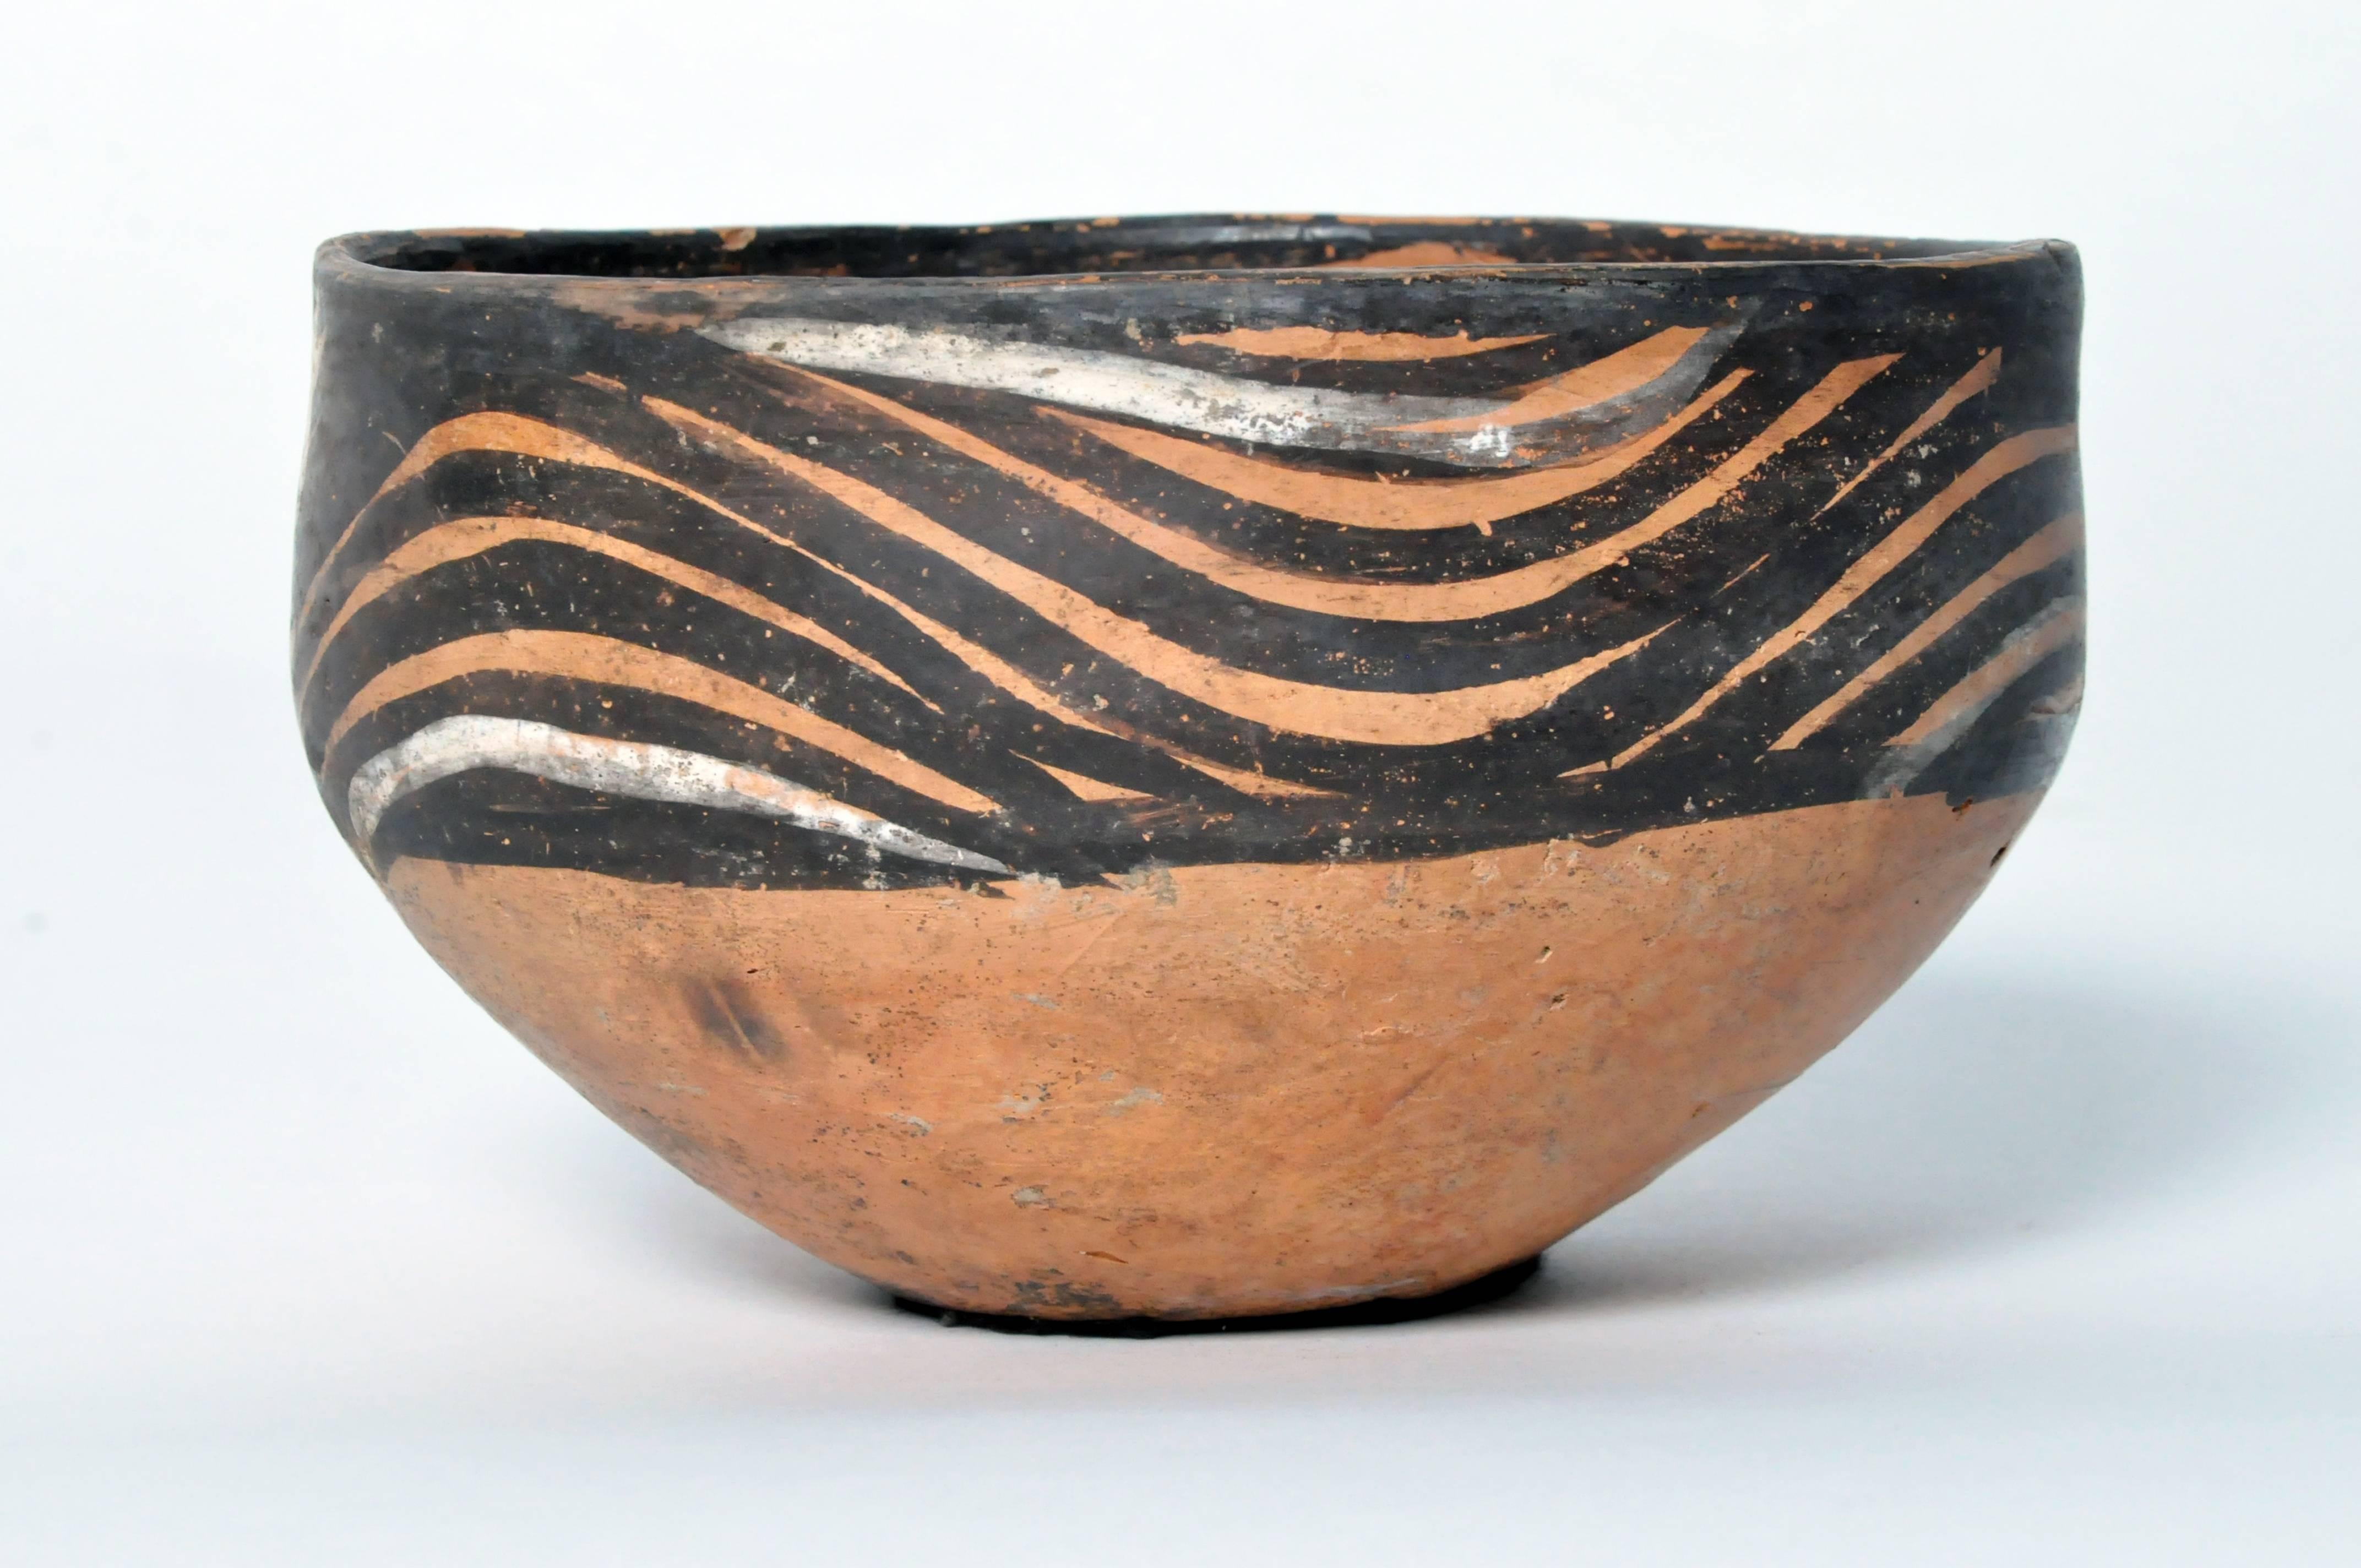 This bowl was made in the Yangshao culture and is of the Ma-chia-yao type. This culture thrived in the northwestern part of China along and around the Yellow River between 3000 B.C. and 1700 B.C. The piece is in very good condition with no cracks to